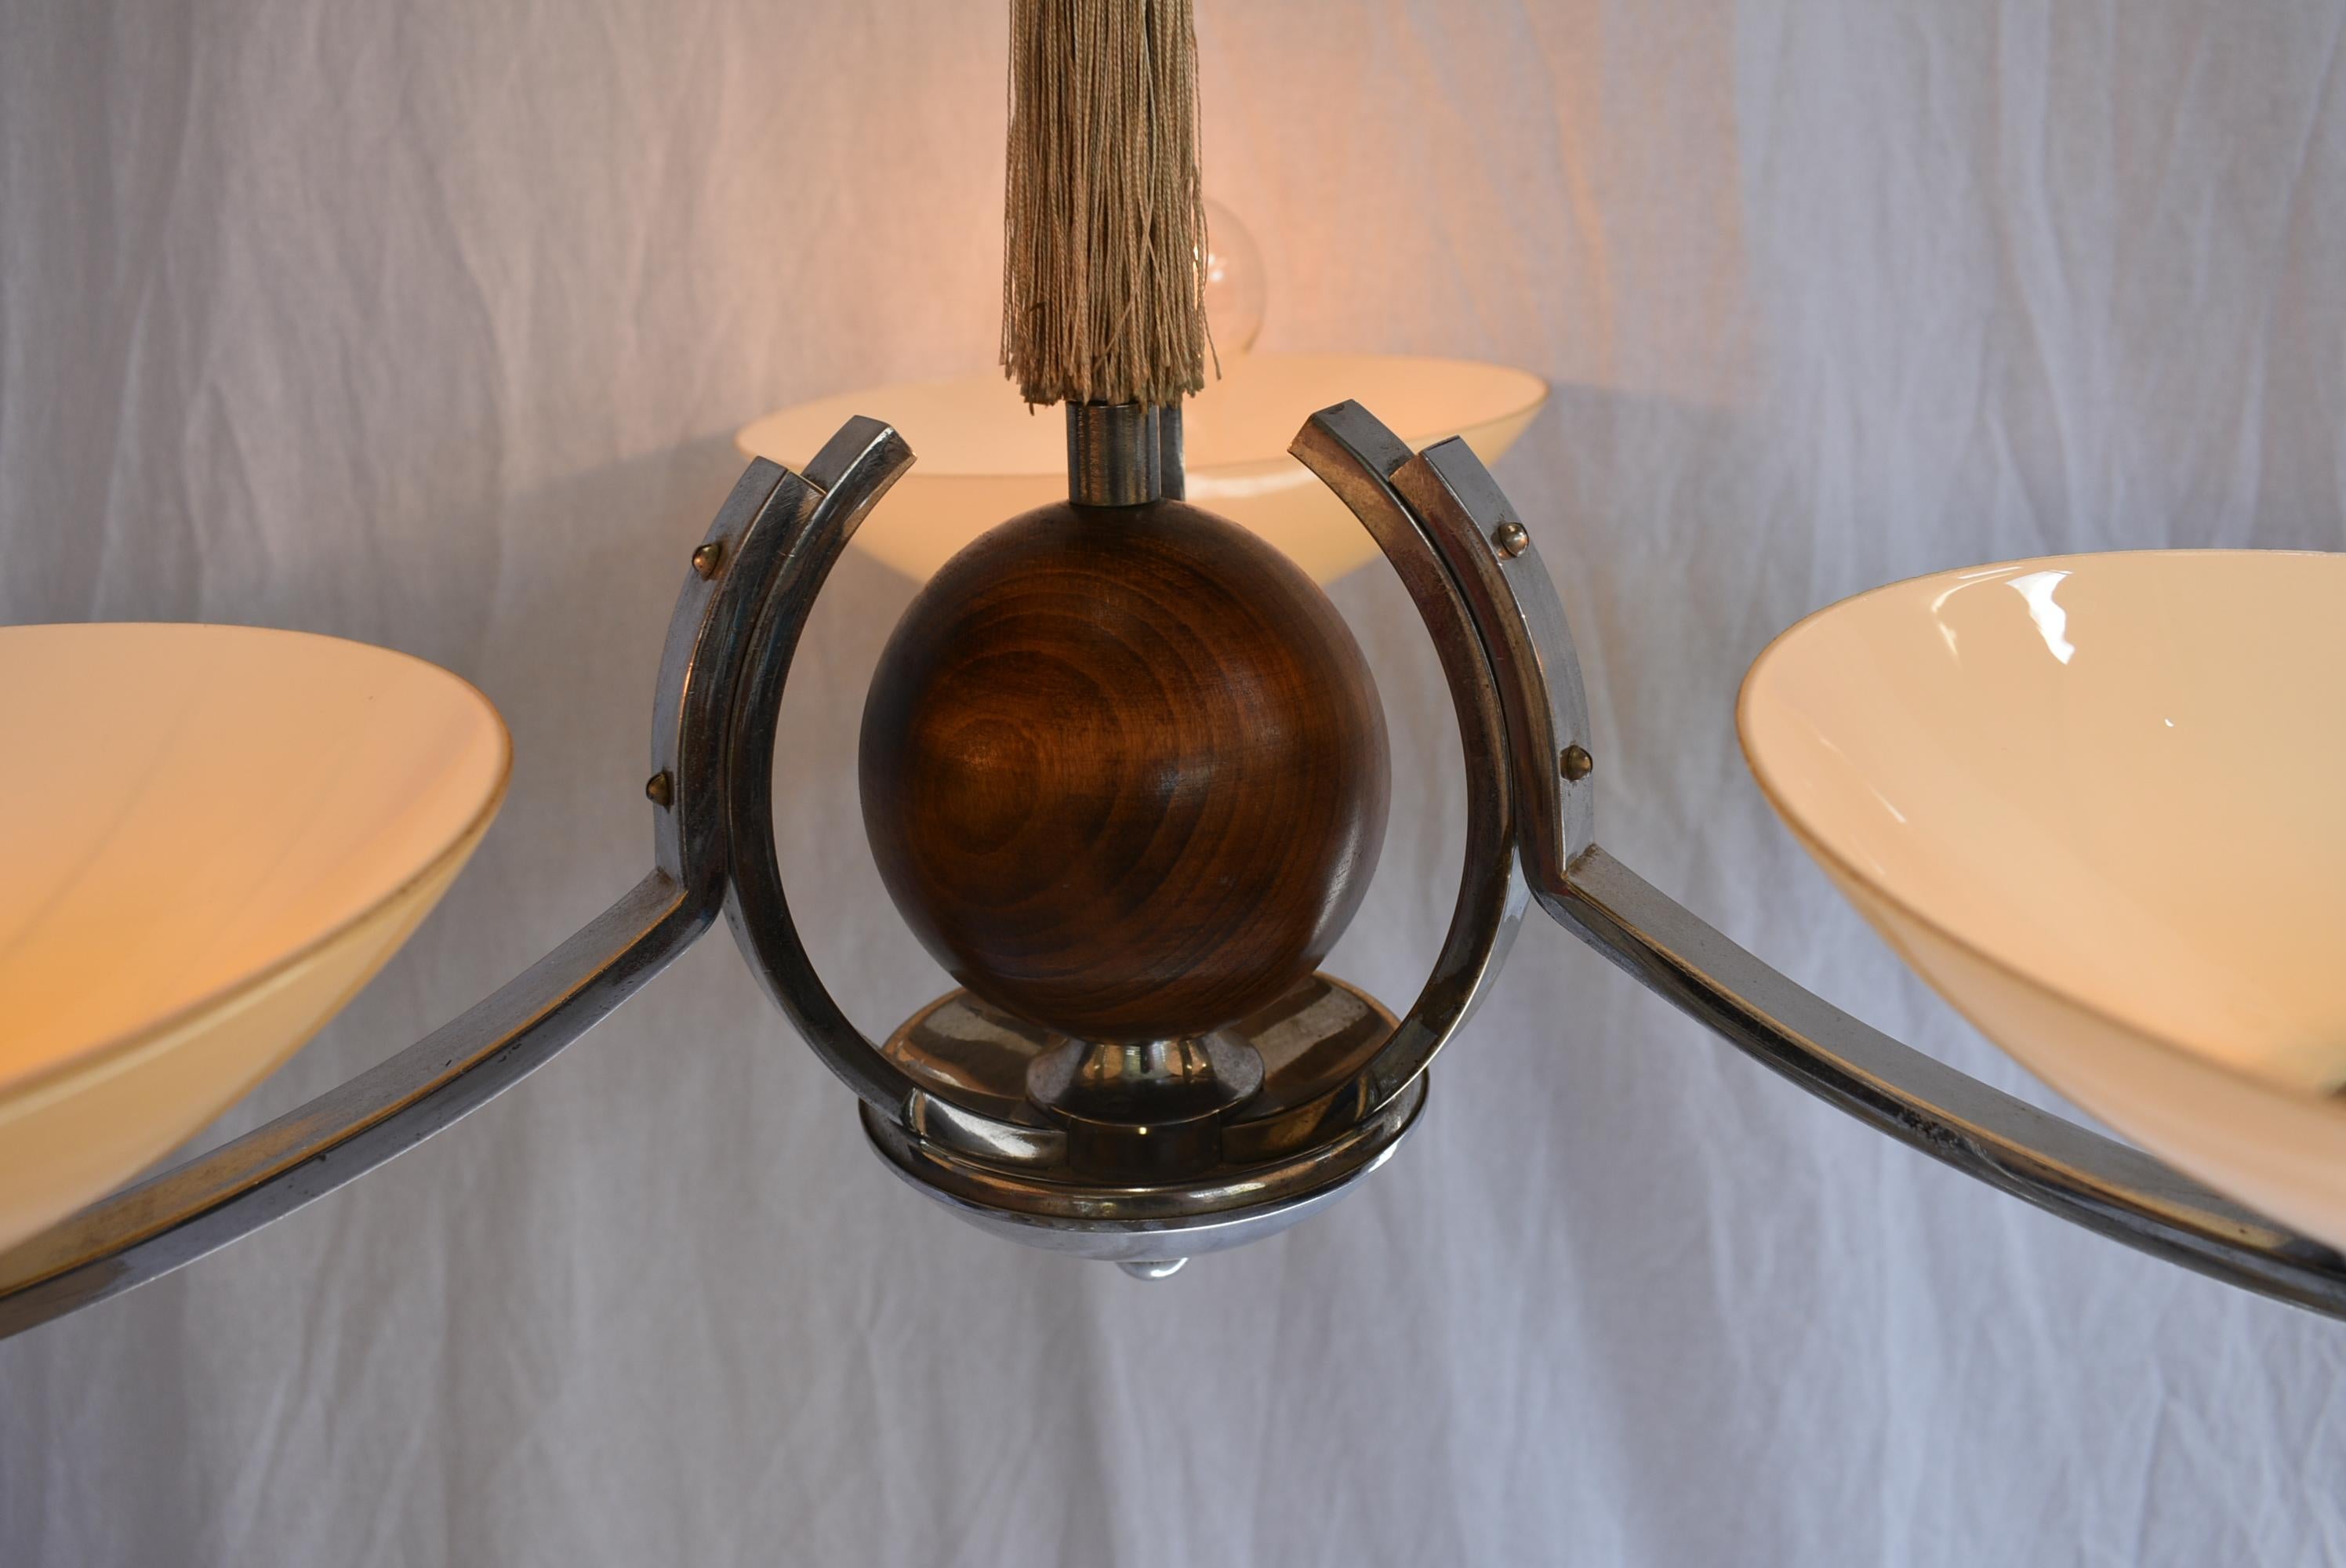 3-flamming chandelier in Art Deco style. Chrome and wood repolished. 3x60W, E27 or E26 bulbs. Good condition.